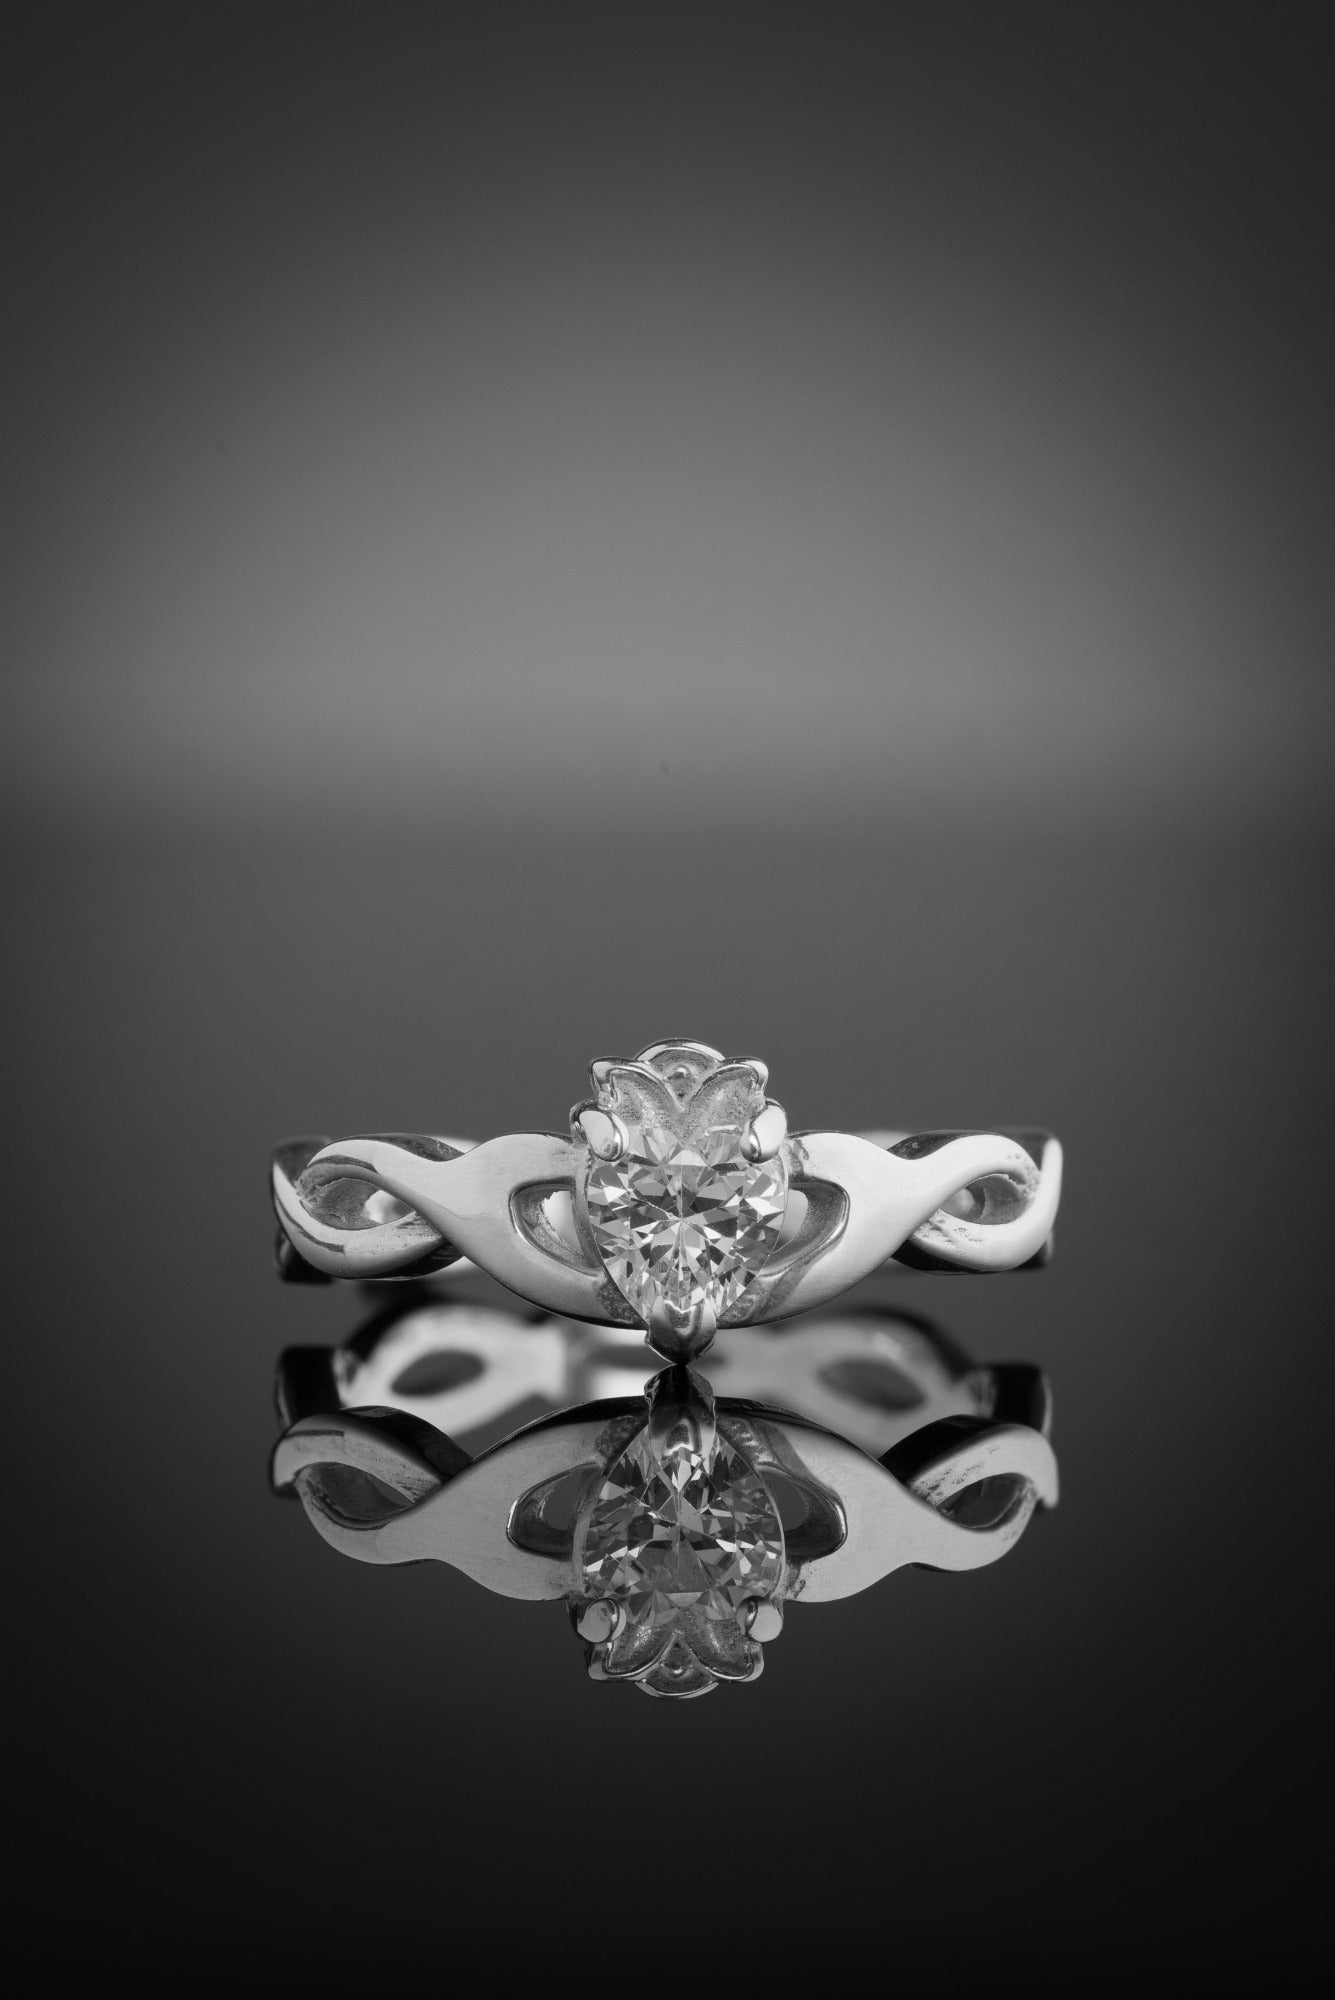 Diamond Claddagh Ring with weave band